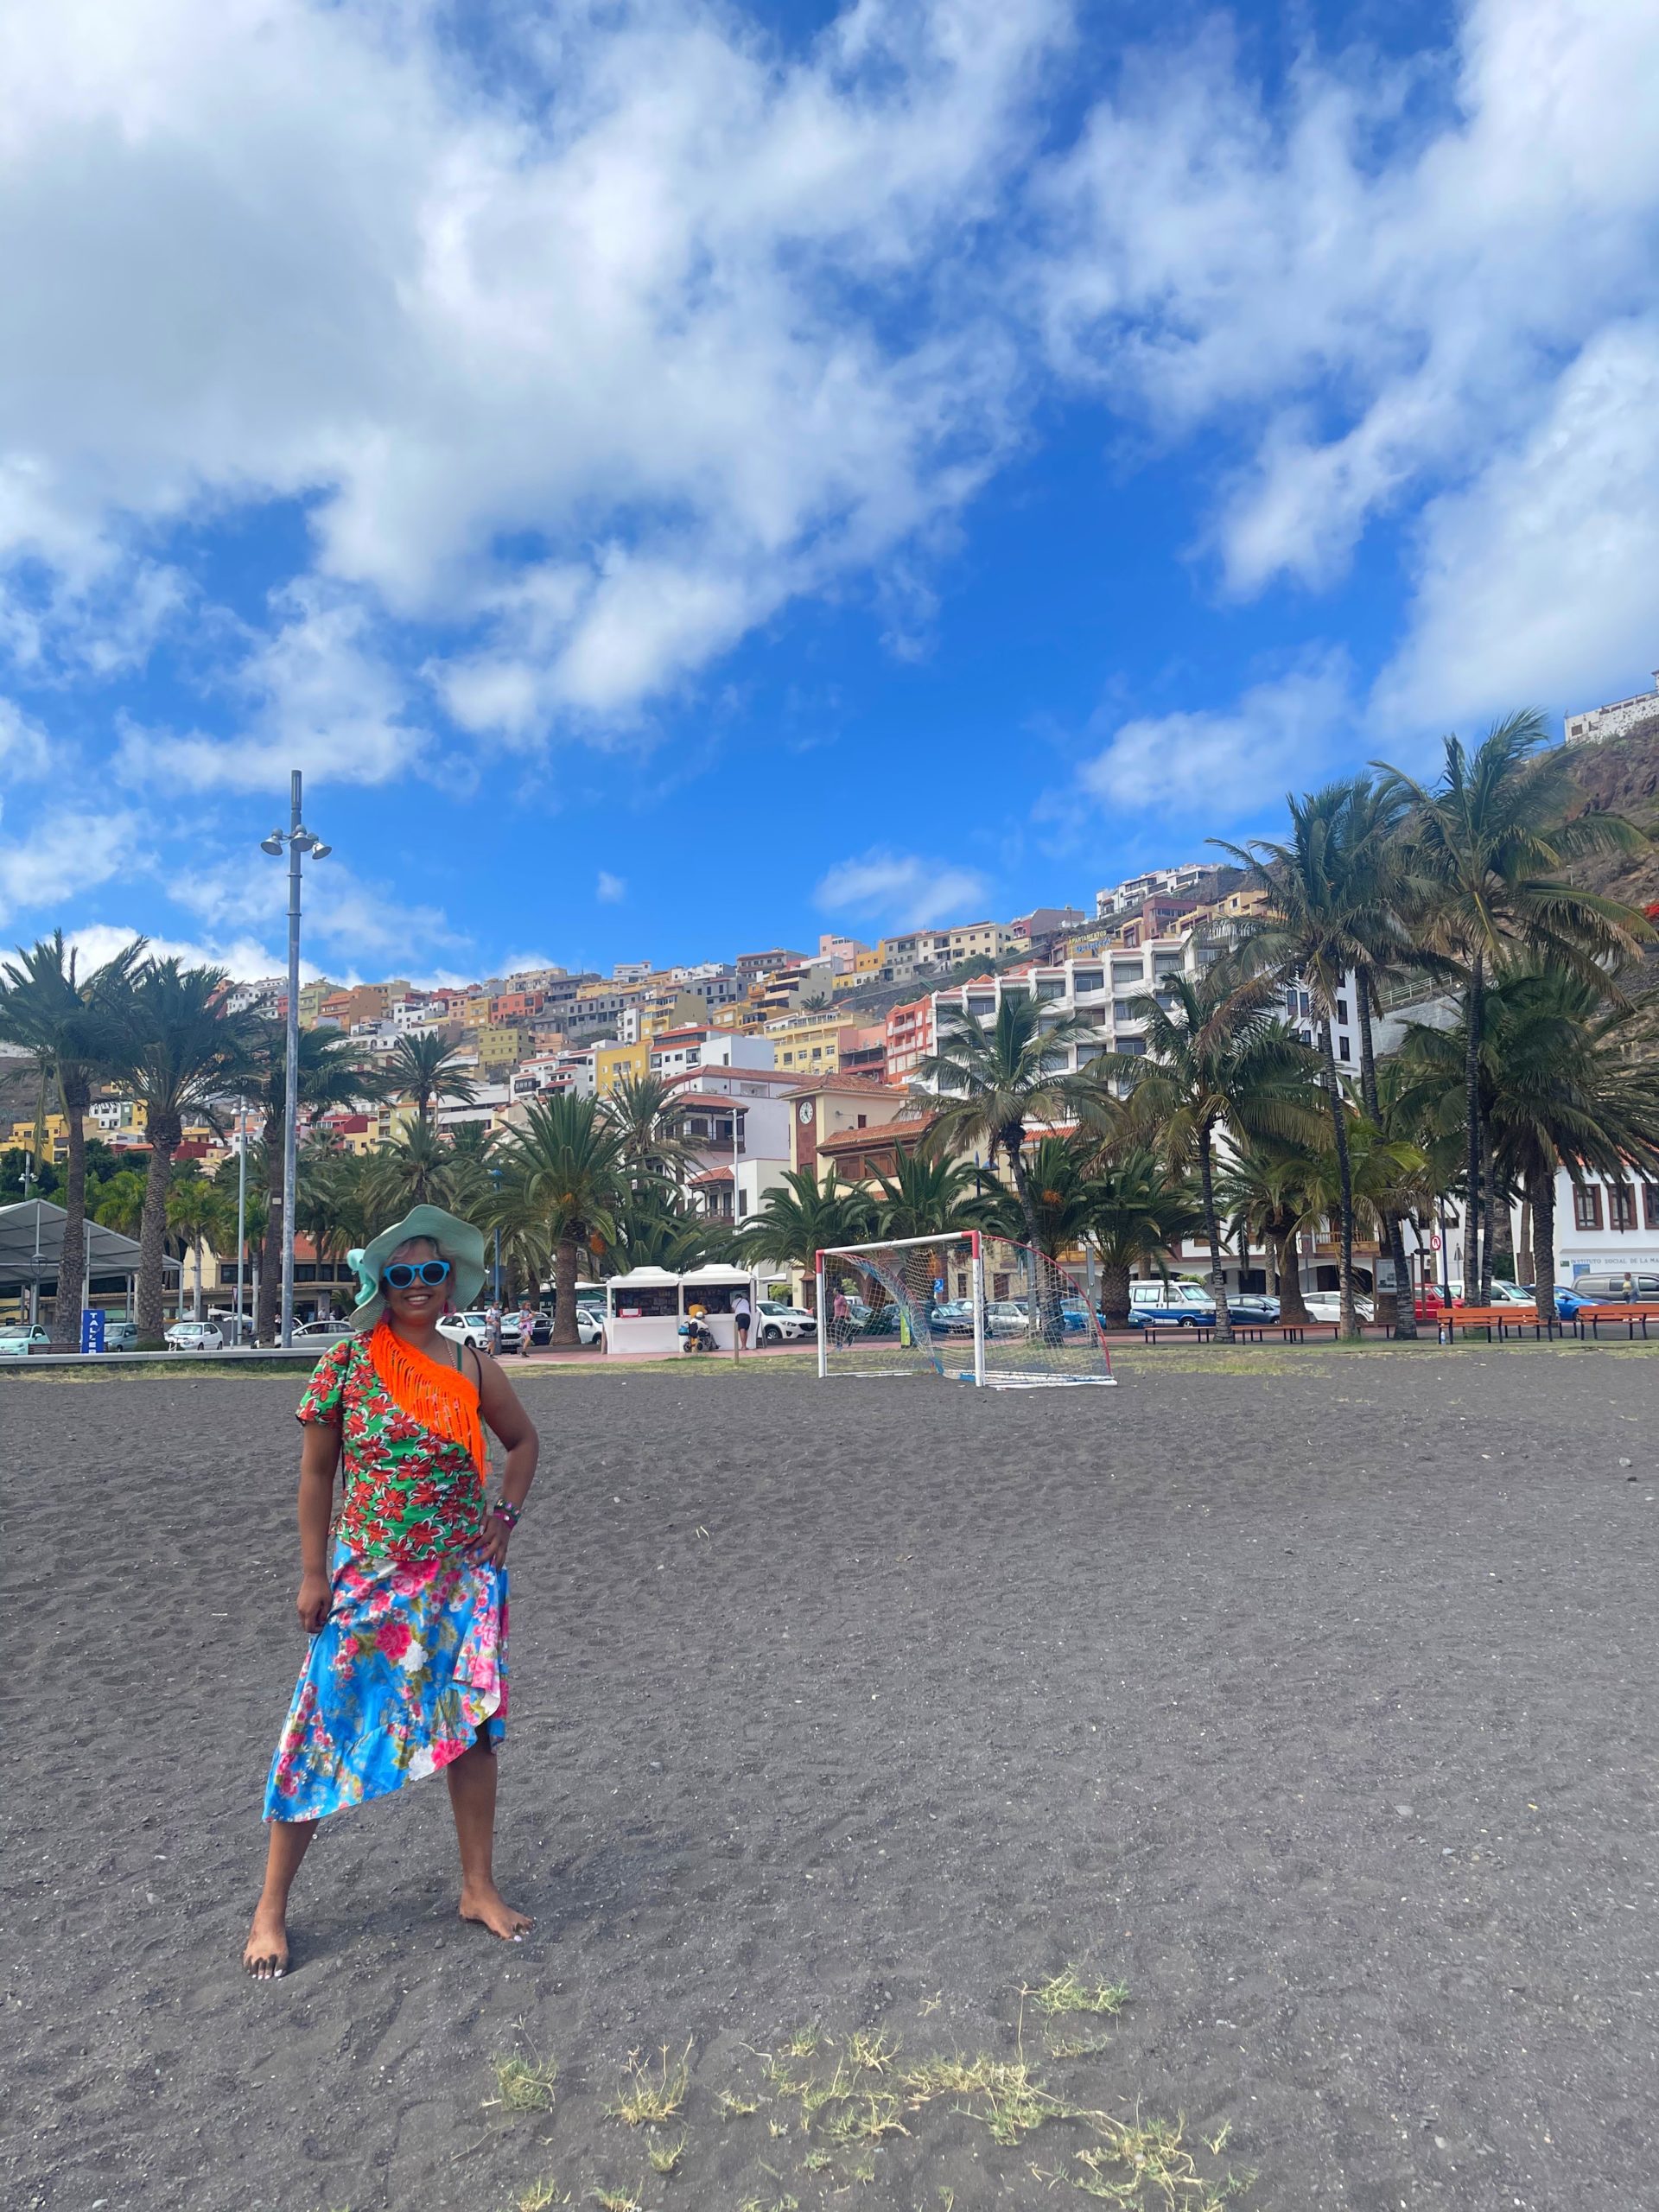 black sand beach at la gomera with colourful buildings in the background